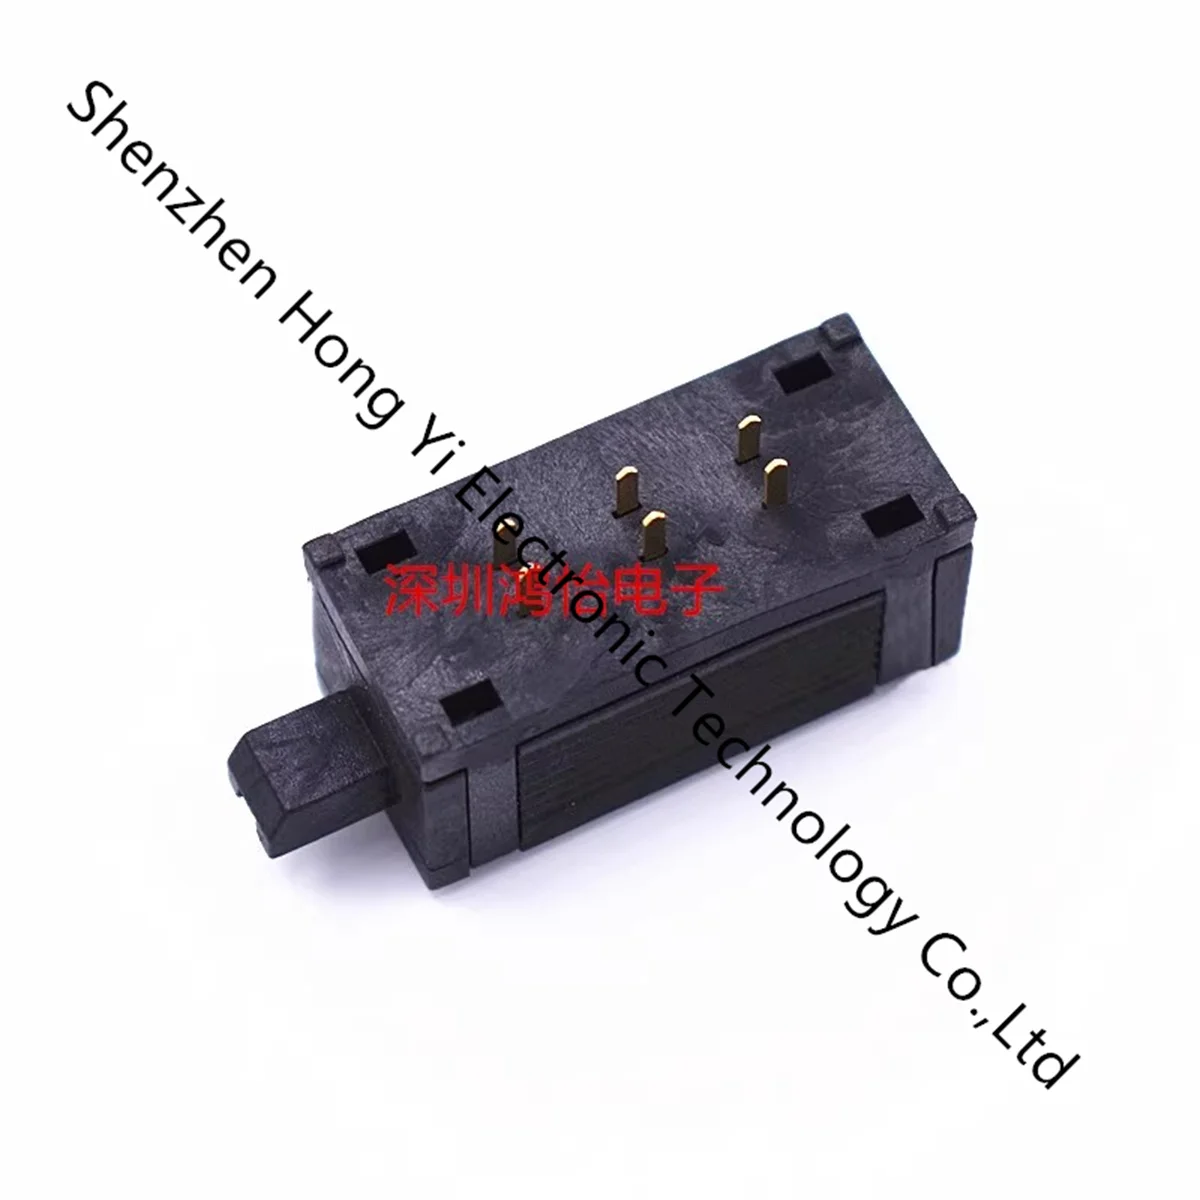 

Aging test stand 0603/06XX row mounted chip capacitor aging stand SMT tantalum capacitor resistor clamp socket